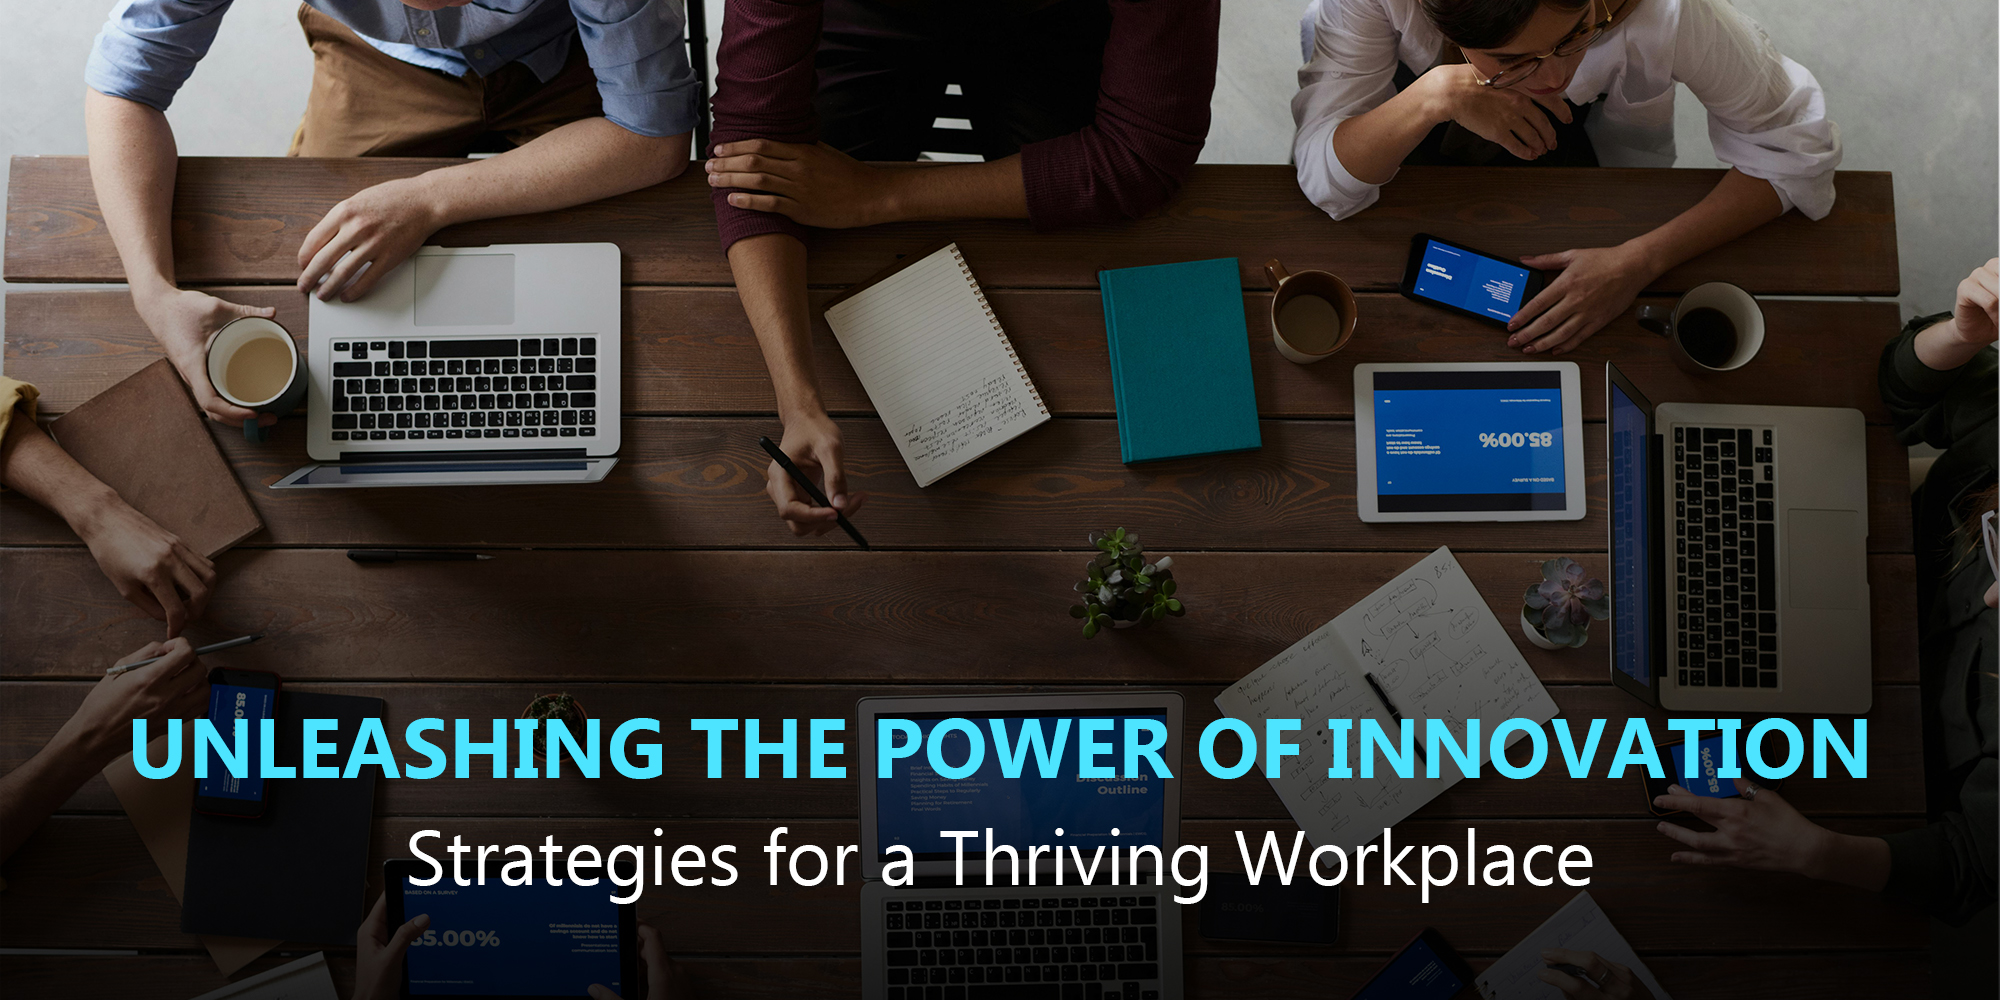 Unleashing the Power of Innovation: Strategies for a Thriving Workplace